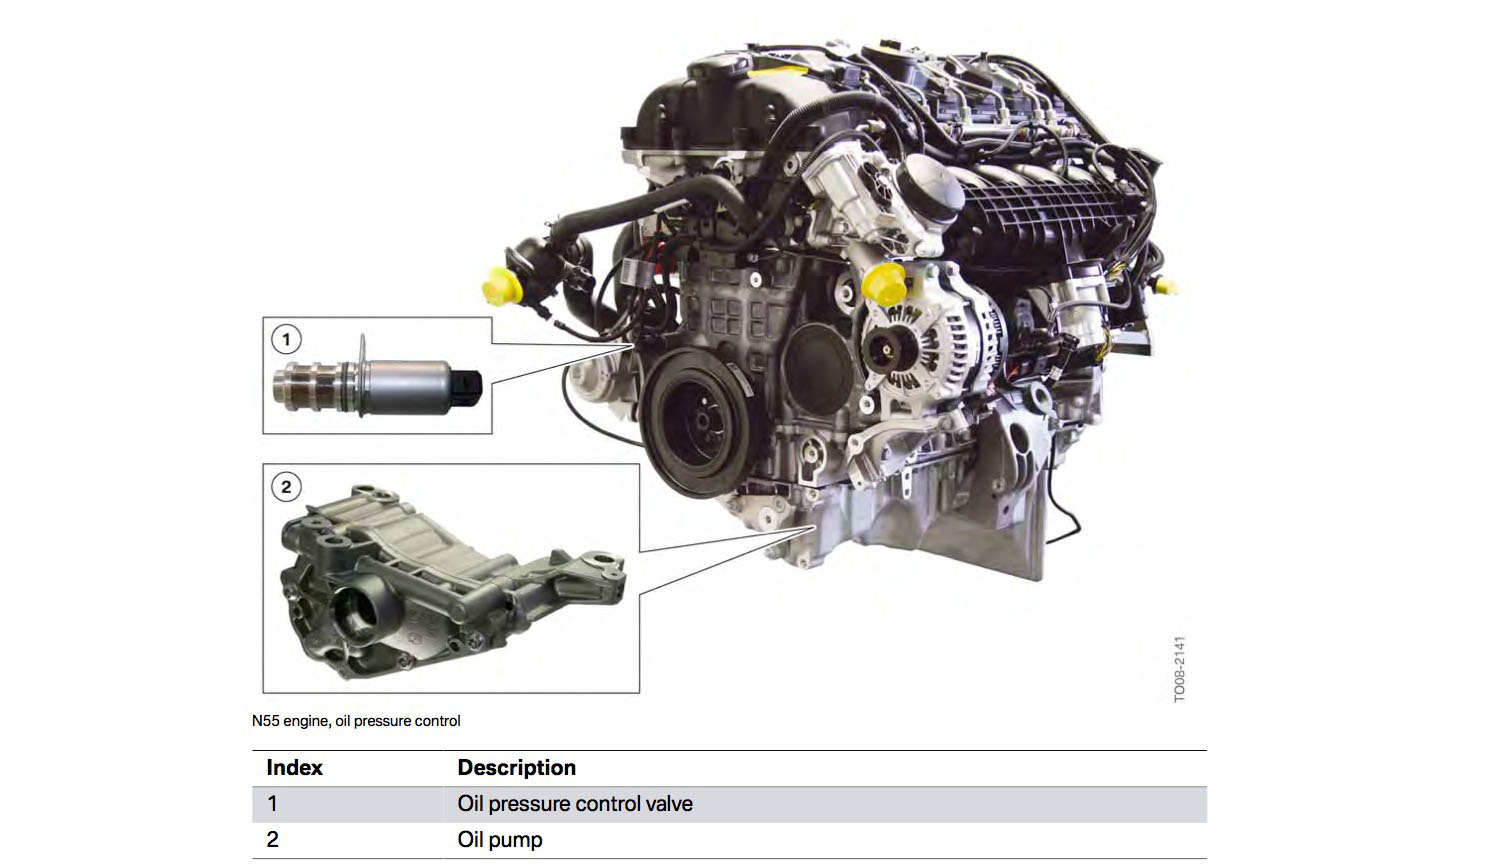 N20 and N55 Motors Make 10 Best Engines List by Ward's Auto (2012)